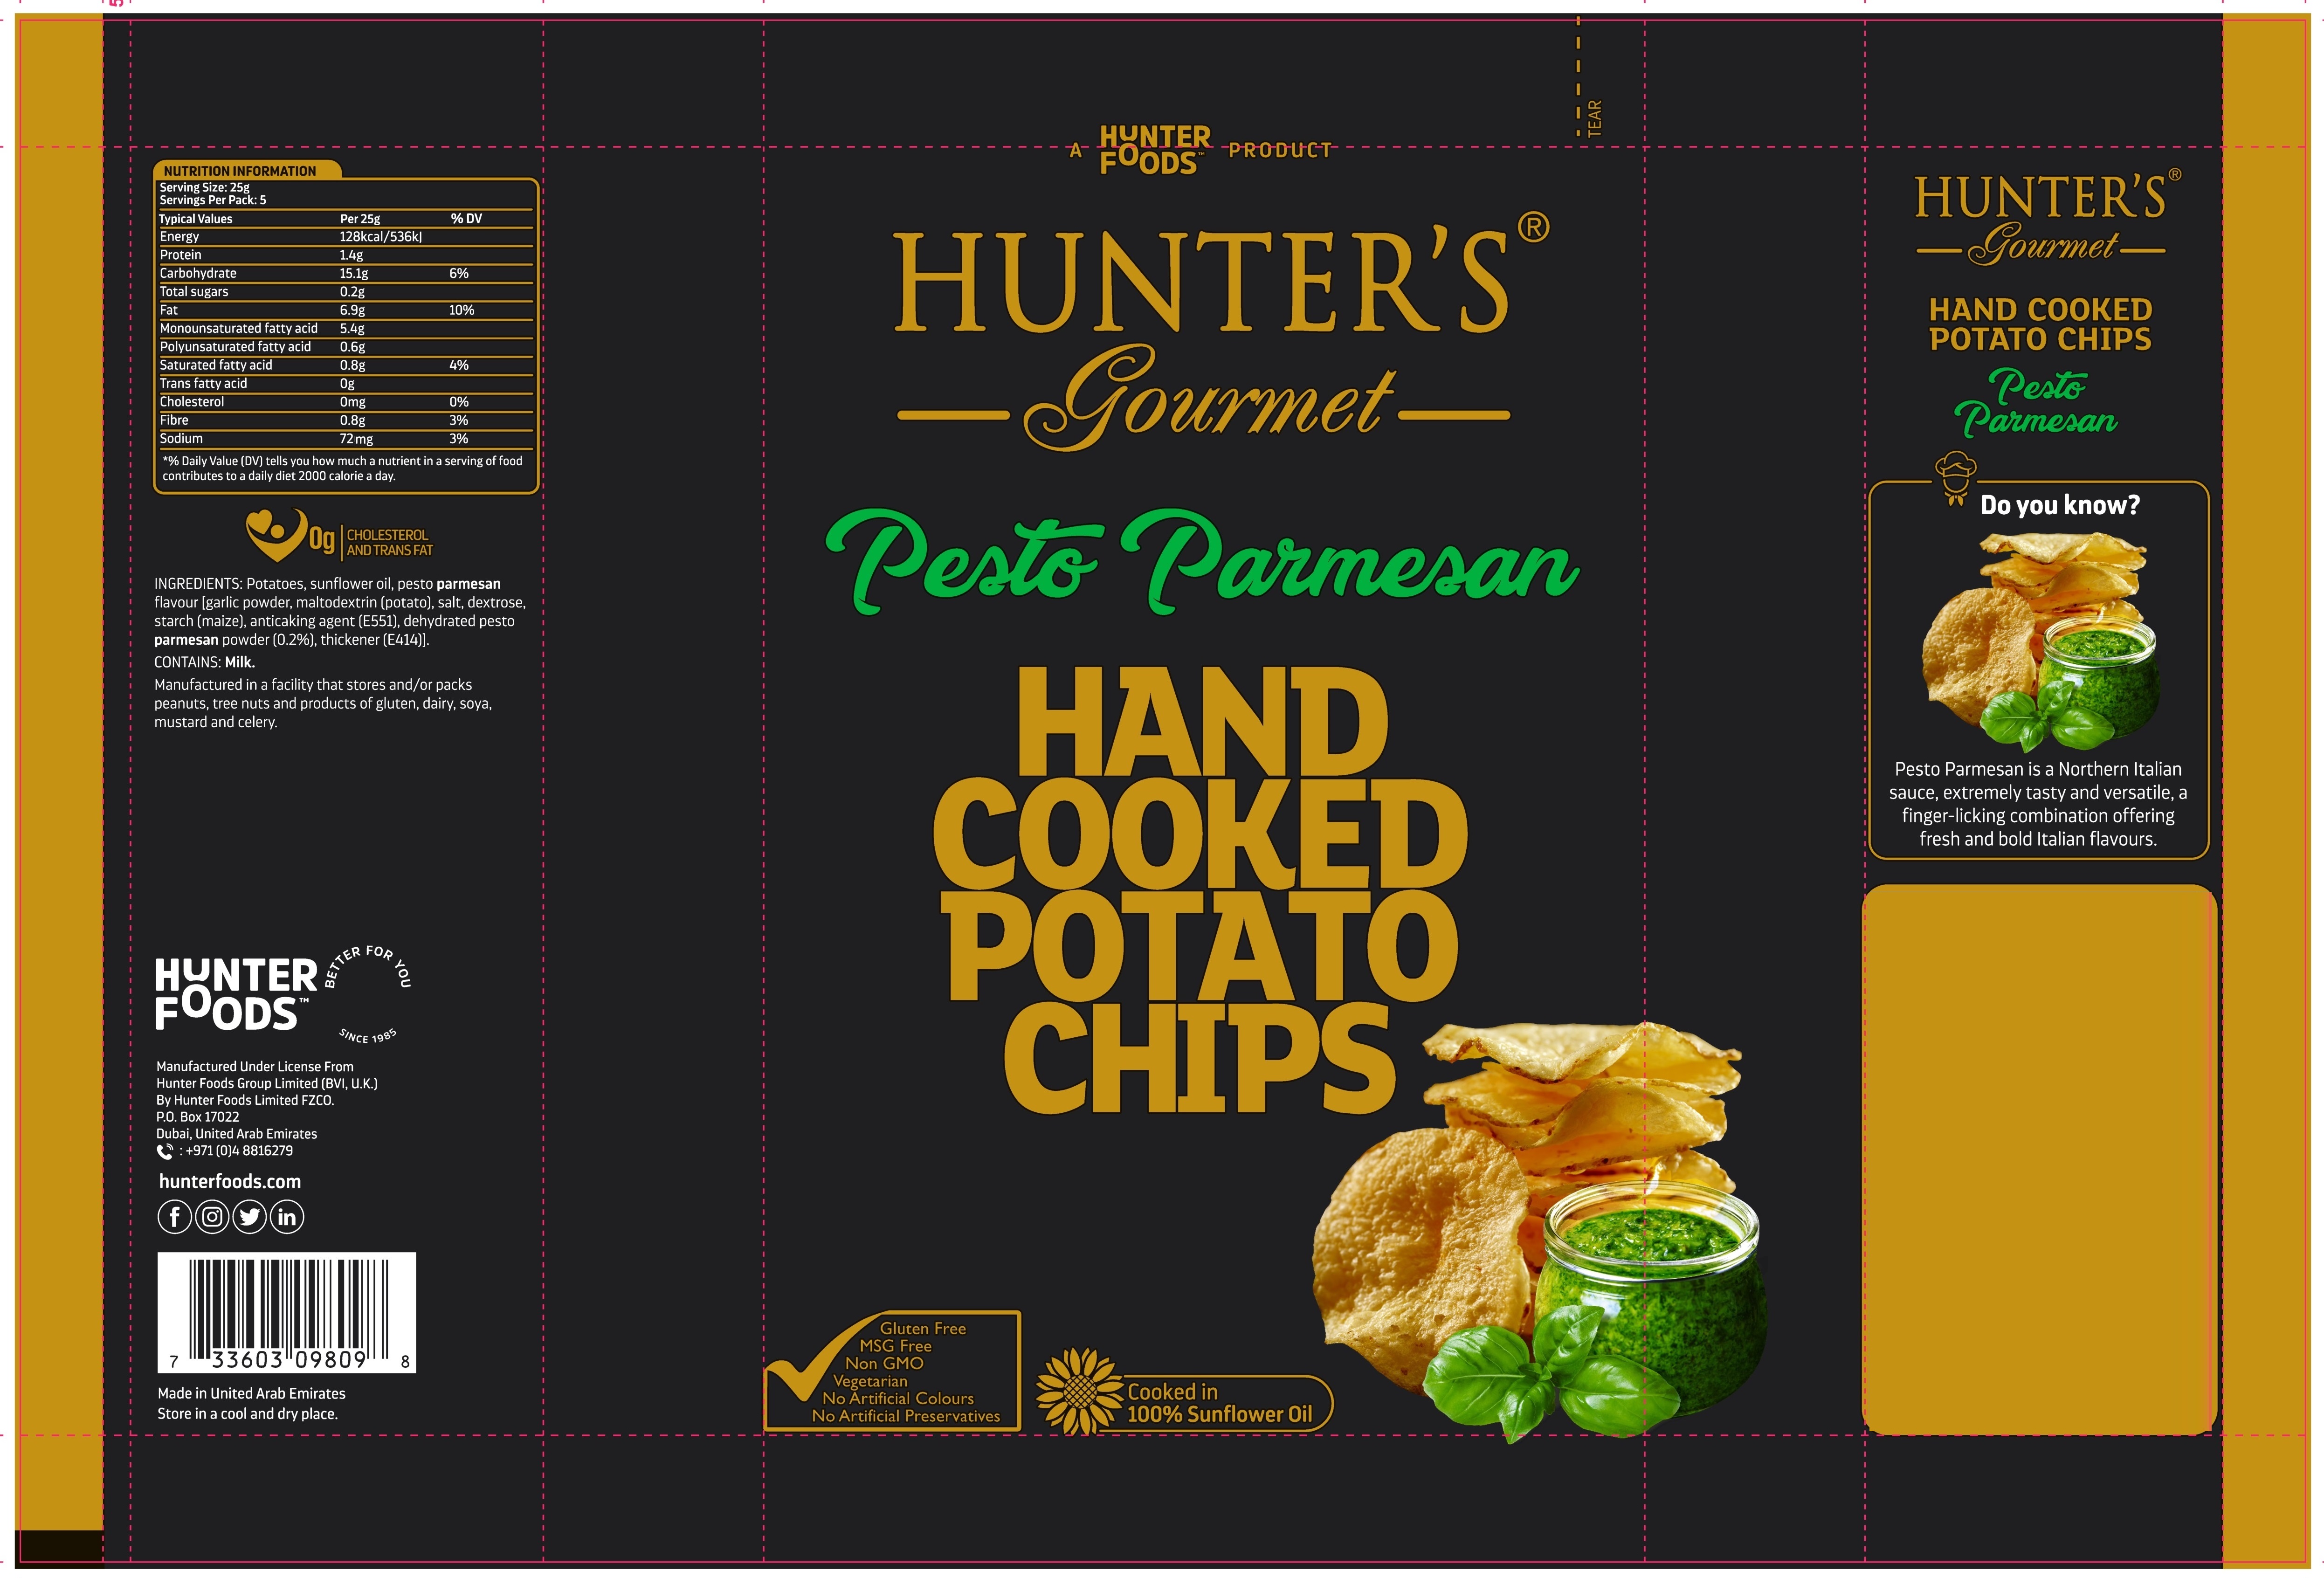 Hunter's Gourmet Hand Cooked Potato Chips Pesto Parmesan 12 units per case 125 g Product Label